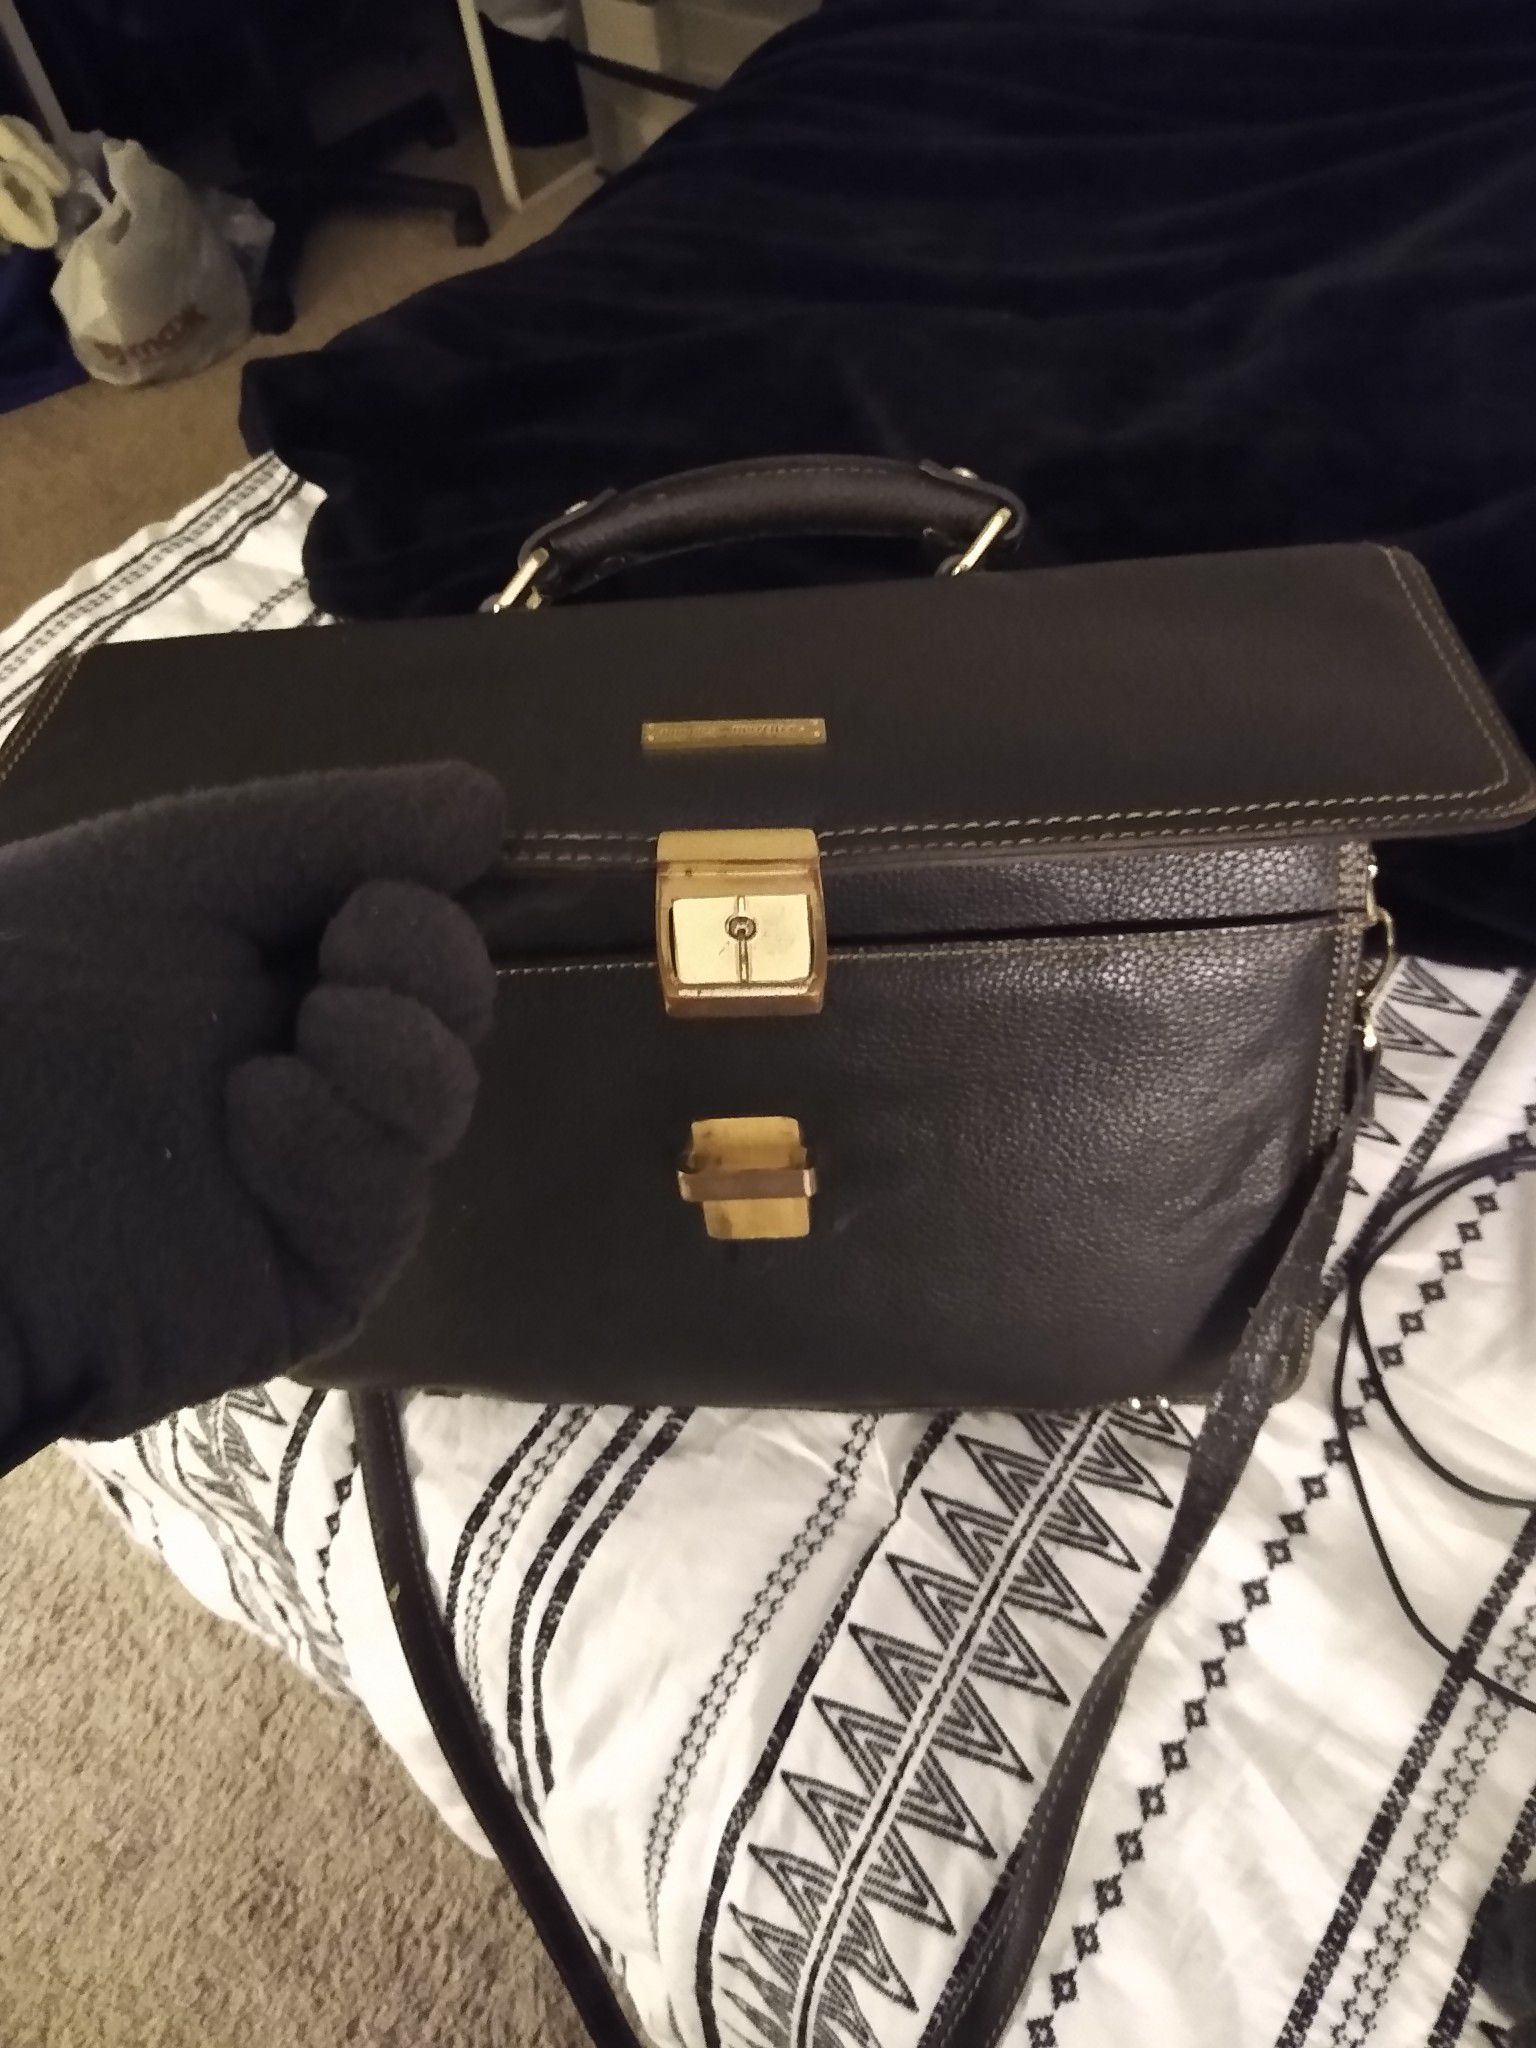 Brooks Brothers briefcase